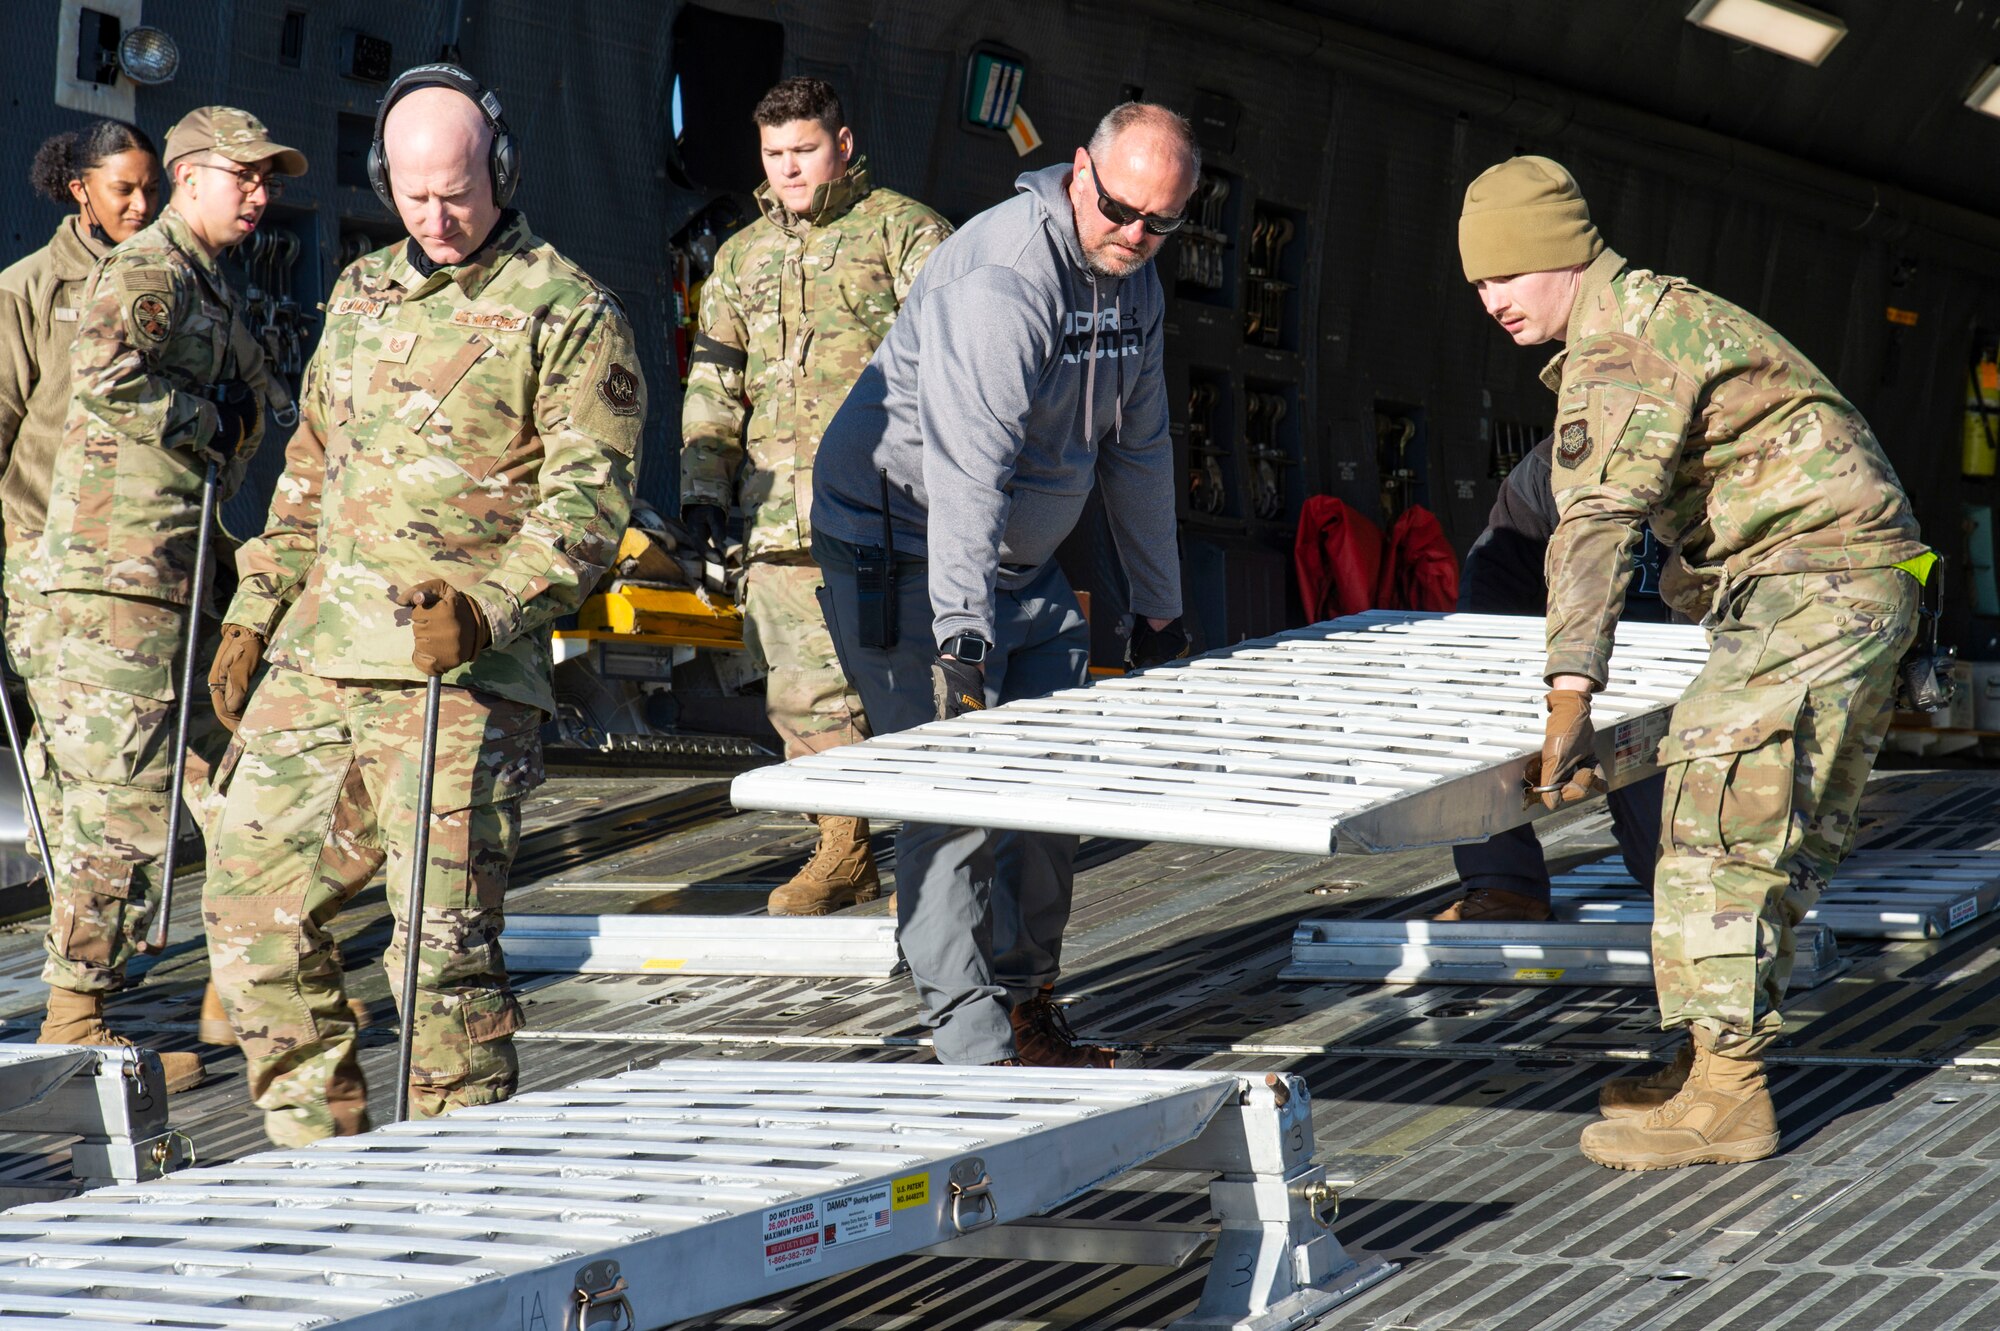 Ramp services personnel from the 436th Aerial Port Squadron place a modular ramp system in position to facilitate the loading of water filtration equipment onto a C-5M Super Galaxy at Dover Air Force Base, Delaware, Dec. 20, 2021. An aircrew from the 9th Airlift Squadron flew the equipment to Joint Base Pearl Harbor-Hickam (JBPHH), Hawaii. The JBPHH water quality recovery is a joint U.S. military initiative working closely with the State of Hawaii, Department of Health, Honolulu Board of Water Supply, U.S. government and independent organizations to restore a safe water delivery system to JBPHH military housing communities through testing, treatment, and repair. For detailed information, including available resources and locations, and news, go to www.navy.mil/jointbasewater. (U.S. Air Force photo by Roland Balik)